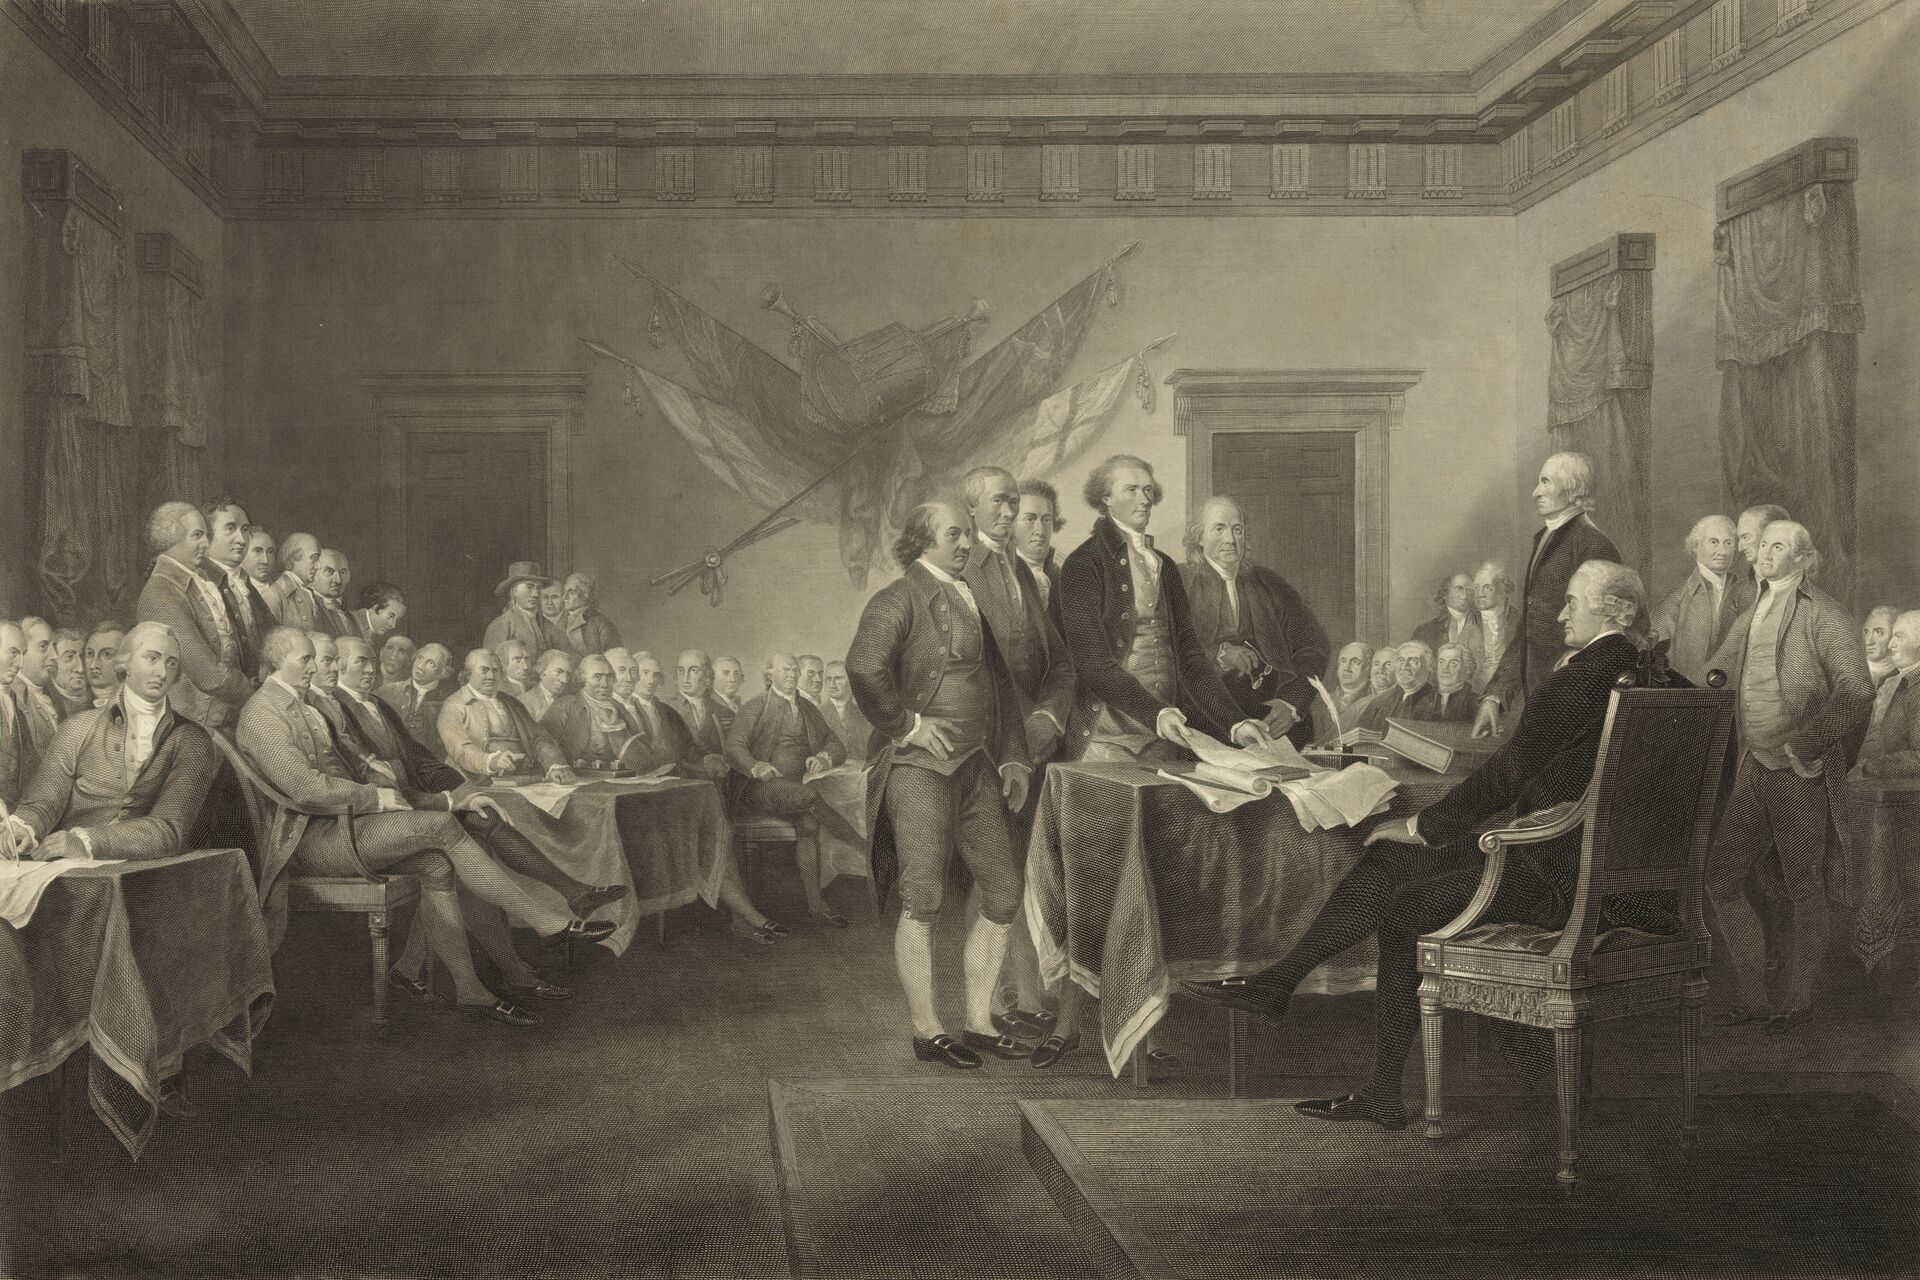 This image shows an 1876 engraving titled Declaration of Independence, July 4th, 1776 made available by the Library of Congress. On that day, the Continental Congress formally endorsed the Declaration of Independence. - Sputnik International, 1920, 07.09.2021